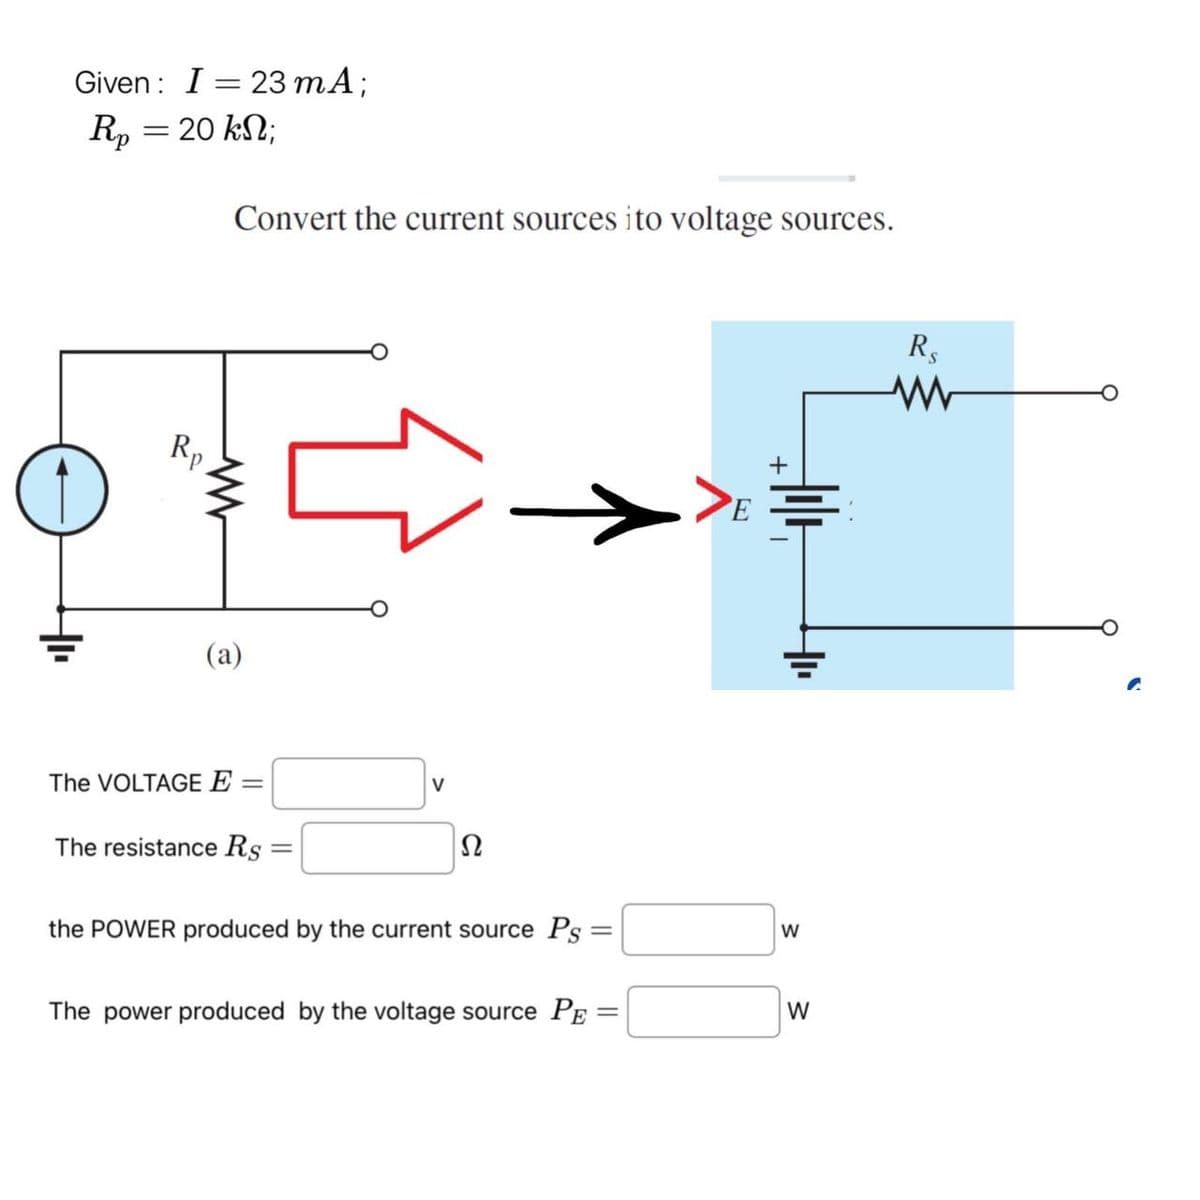 Given: I = 23 mA;
Rp = 20 kn;
Convert the current sources ito voltage sources.
Rp
www
(a)
The VOLTAGE E =
The resistance Rs
=
V
Ω
the POWER produced by the current source Ps:
The power produced by the voltage source PE
E
=
W
=
W
RS
w